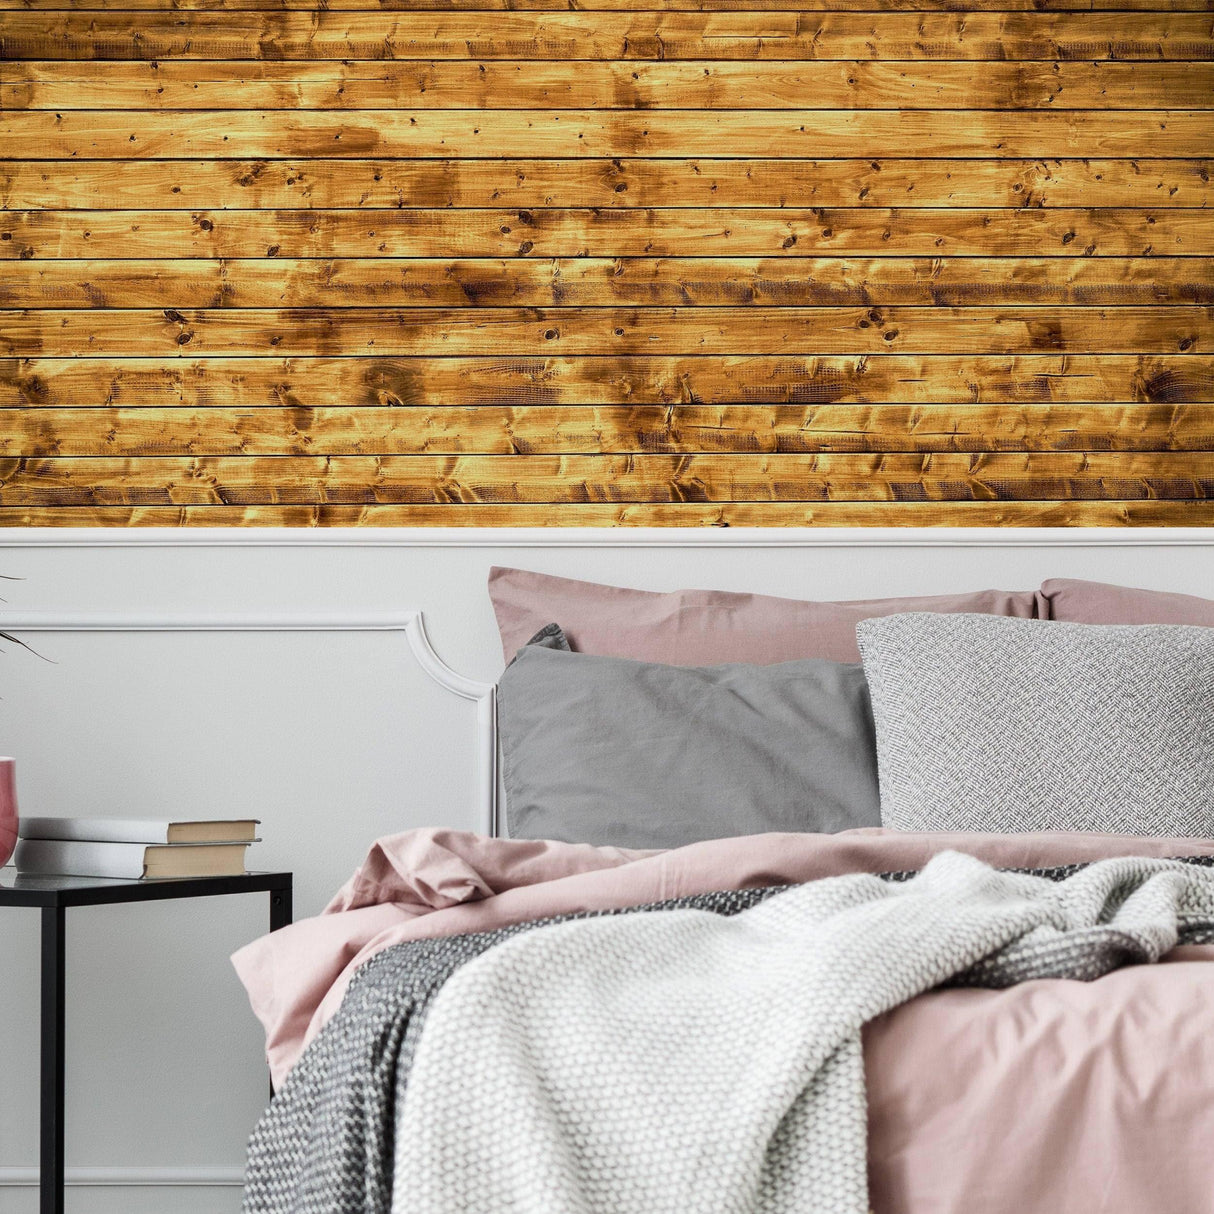 Shiplap Peel And Stick Wallpaper Sticker - Self Adhesive Contact Fake Wood Plank Wall Paper Decal - Removable Wooden Vinyl For Bedroom Room - Decords